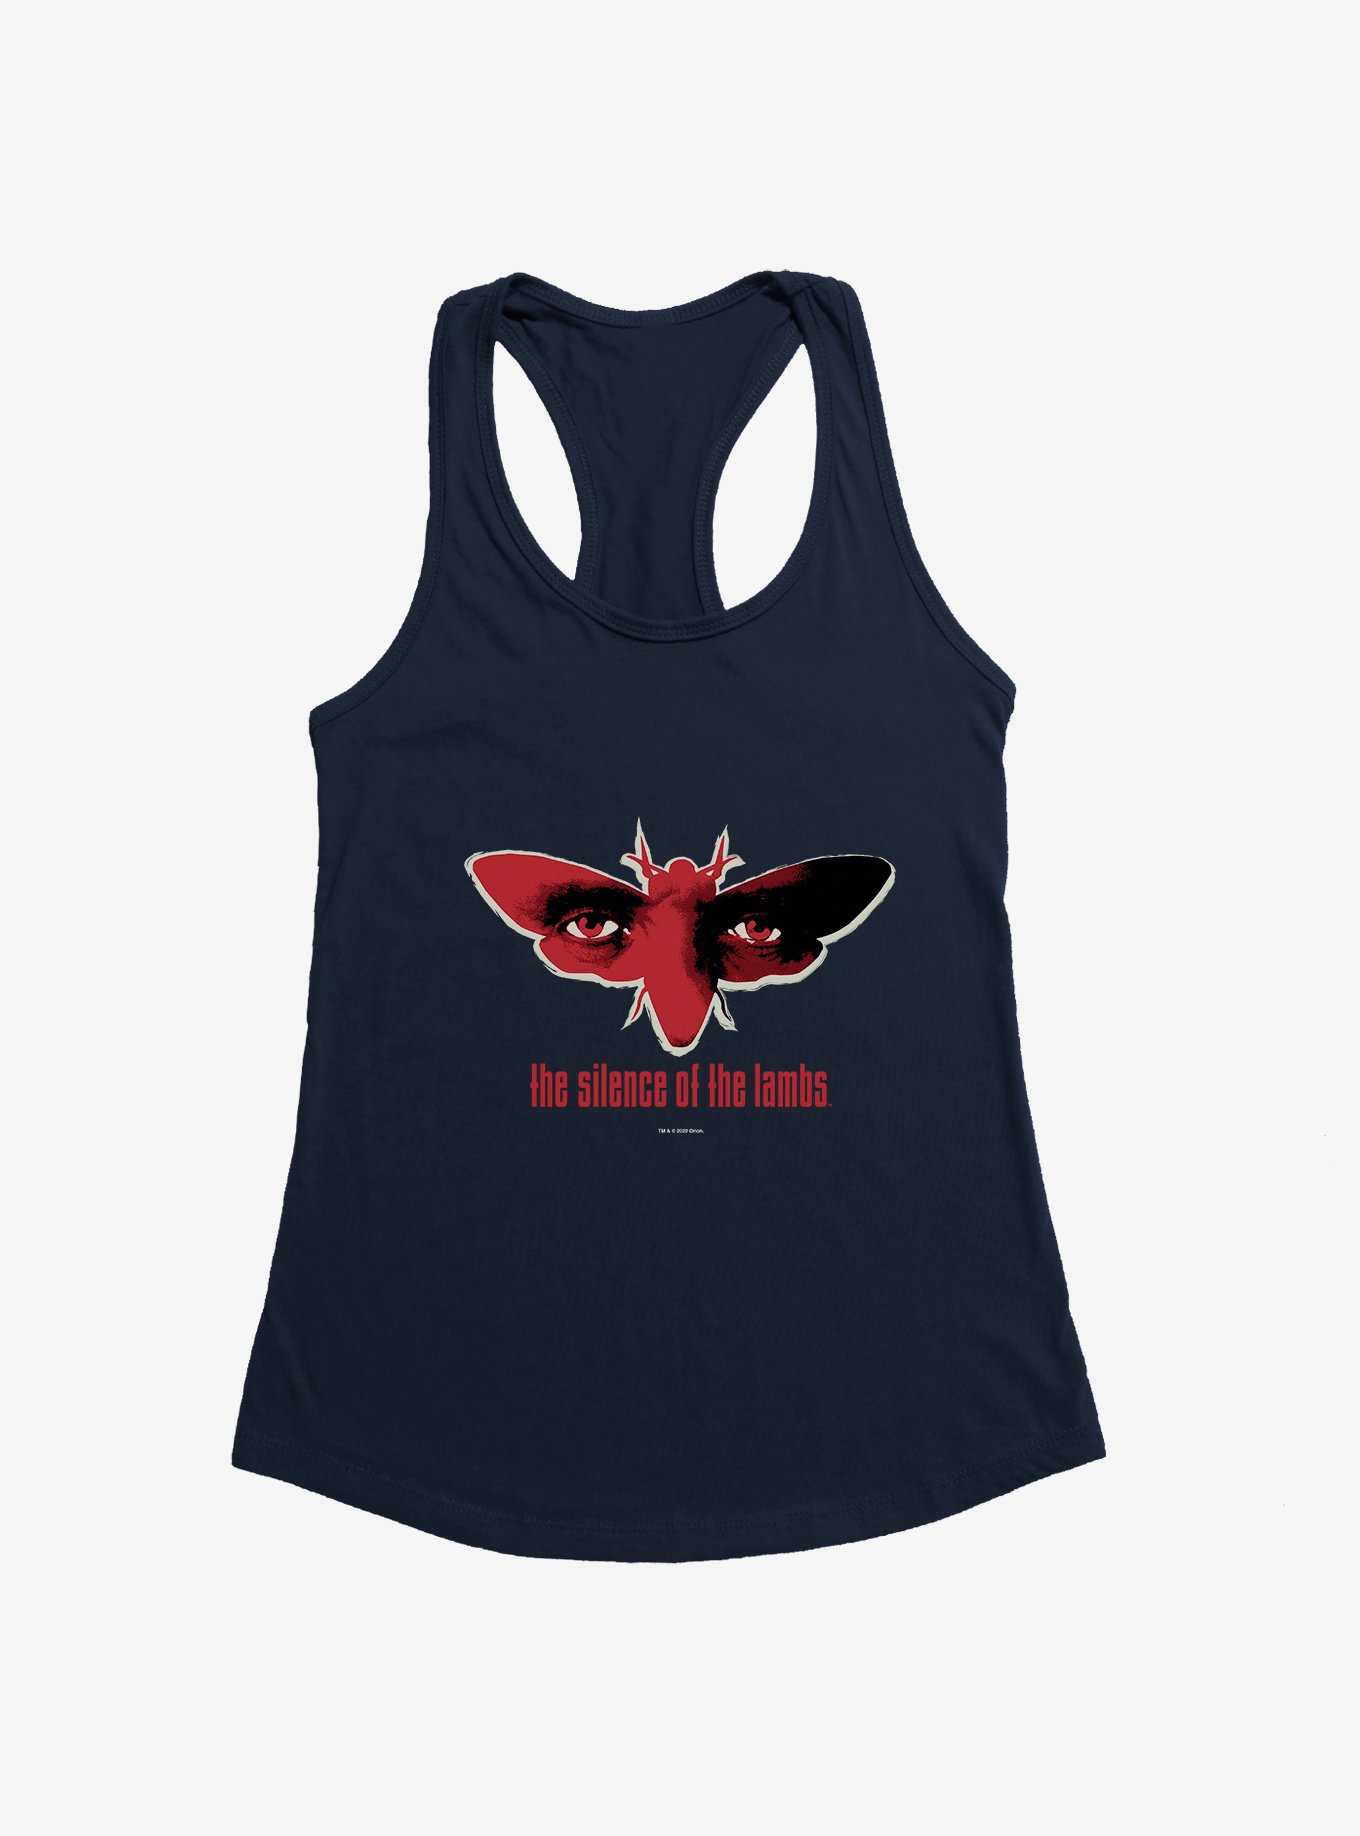 The Silence Of The Lambs Hannibal's Eyes Girls Tank, , hi-res